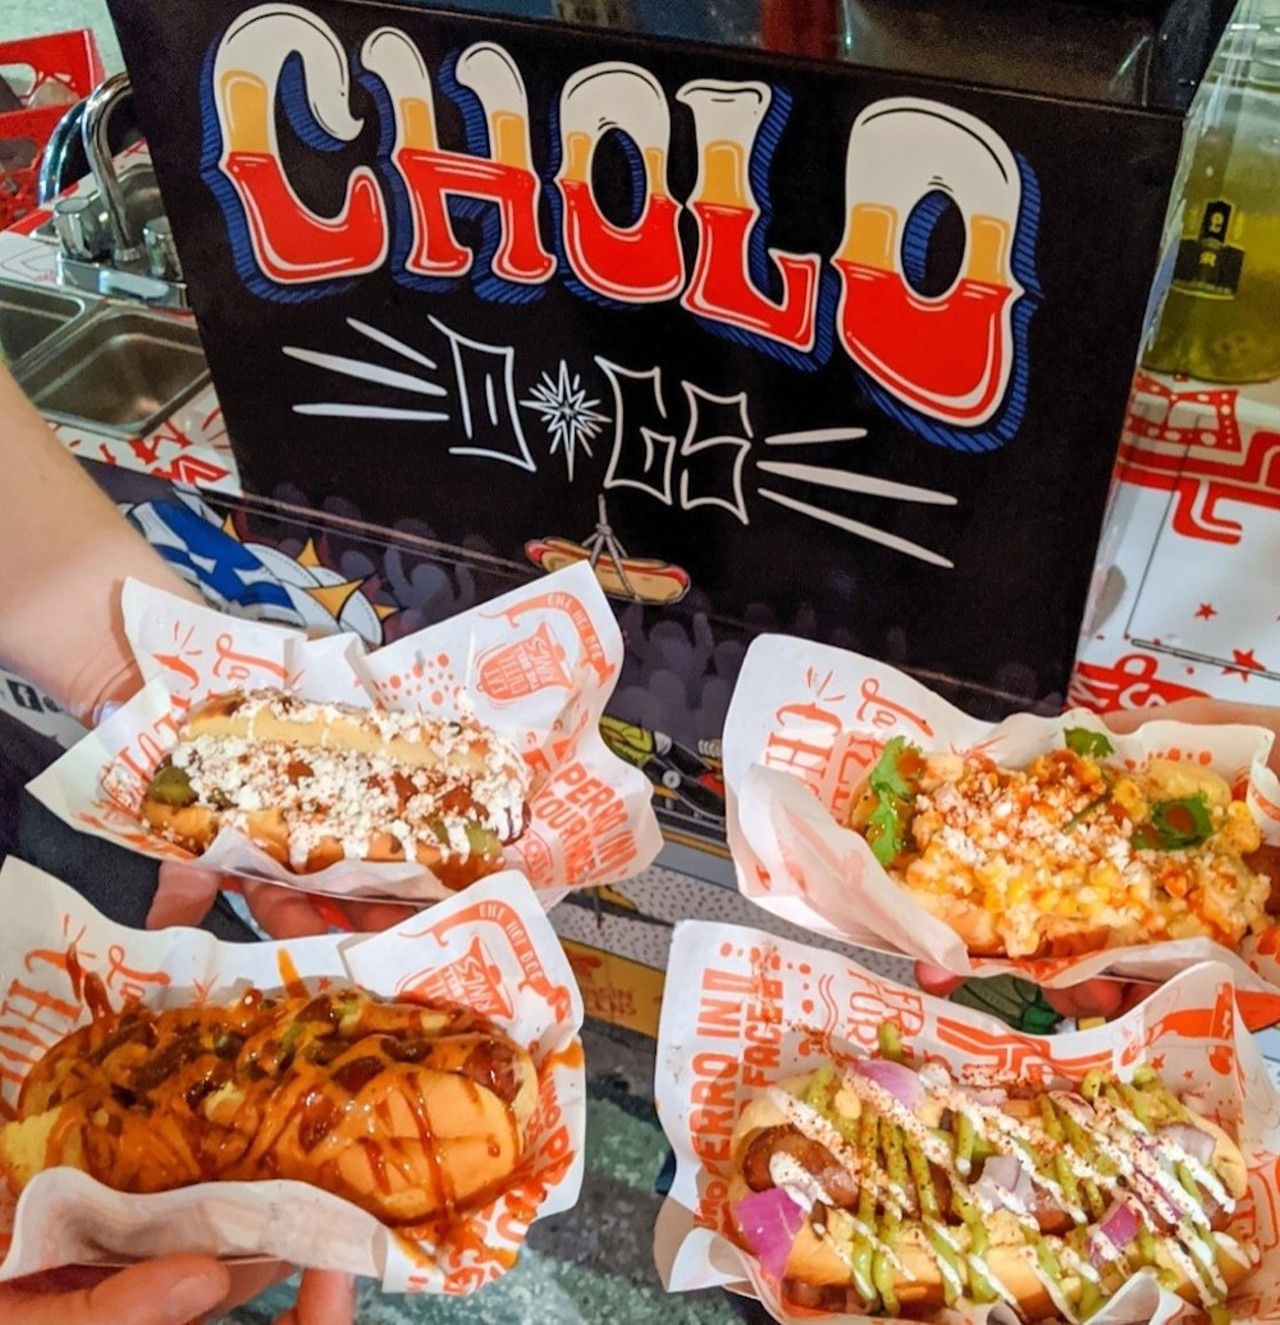 Cholo Dogs 
150 S. Magnolia Ave., 407-412-9230
UPDATE: Cholo Dogs has returned to a pop-up/mobile business model. Follow them on social media to keep track of their location.  Cholo Dogs, started by Franco Furtero, has been all about slingin&#146; tasty Mexican-style weens from their cart to all the hungry people of Mills 50 and beyond. 
Photo via Cholo Dogs/Facebook